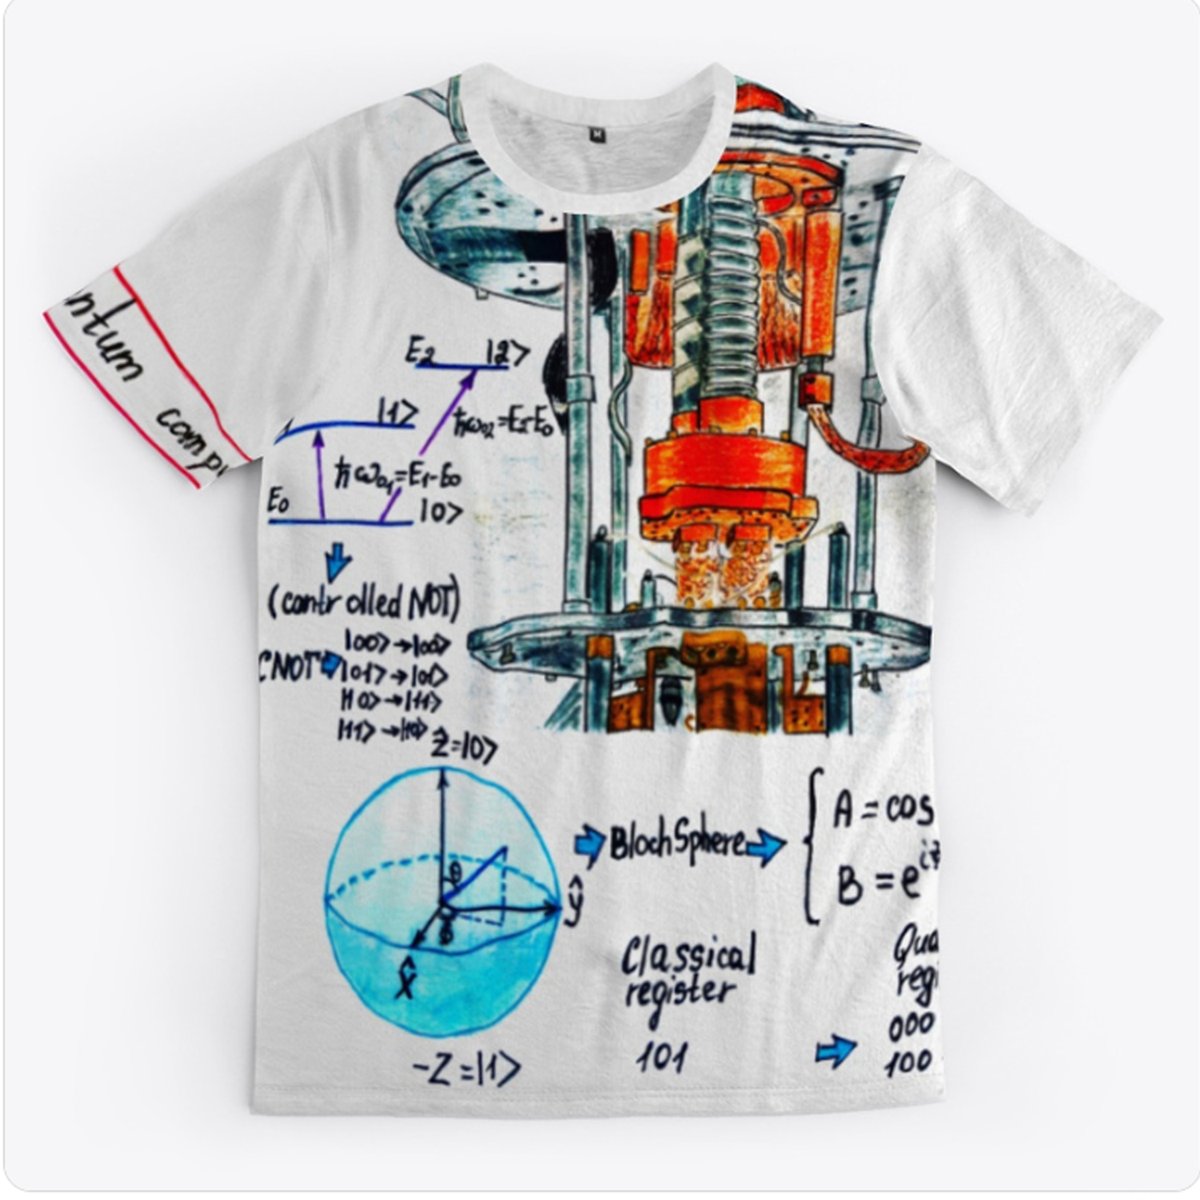 Are you ready to put it on yourself and show it in society. If so, then welcome to my notes store! This product can be purchased at the link: jurij0001.creator-spring.com/listing/quantu… Sincerely, Yuri Kovalenok #physics #art #science #tshits #tshirt #shoppingstar